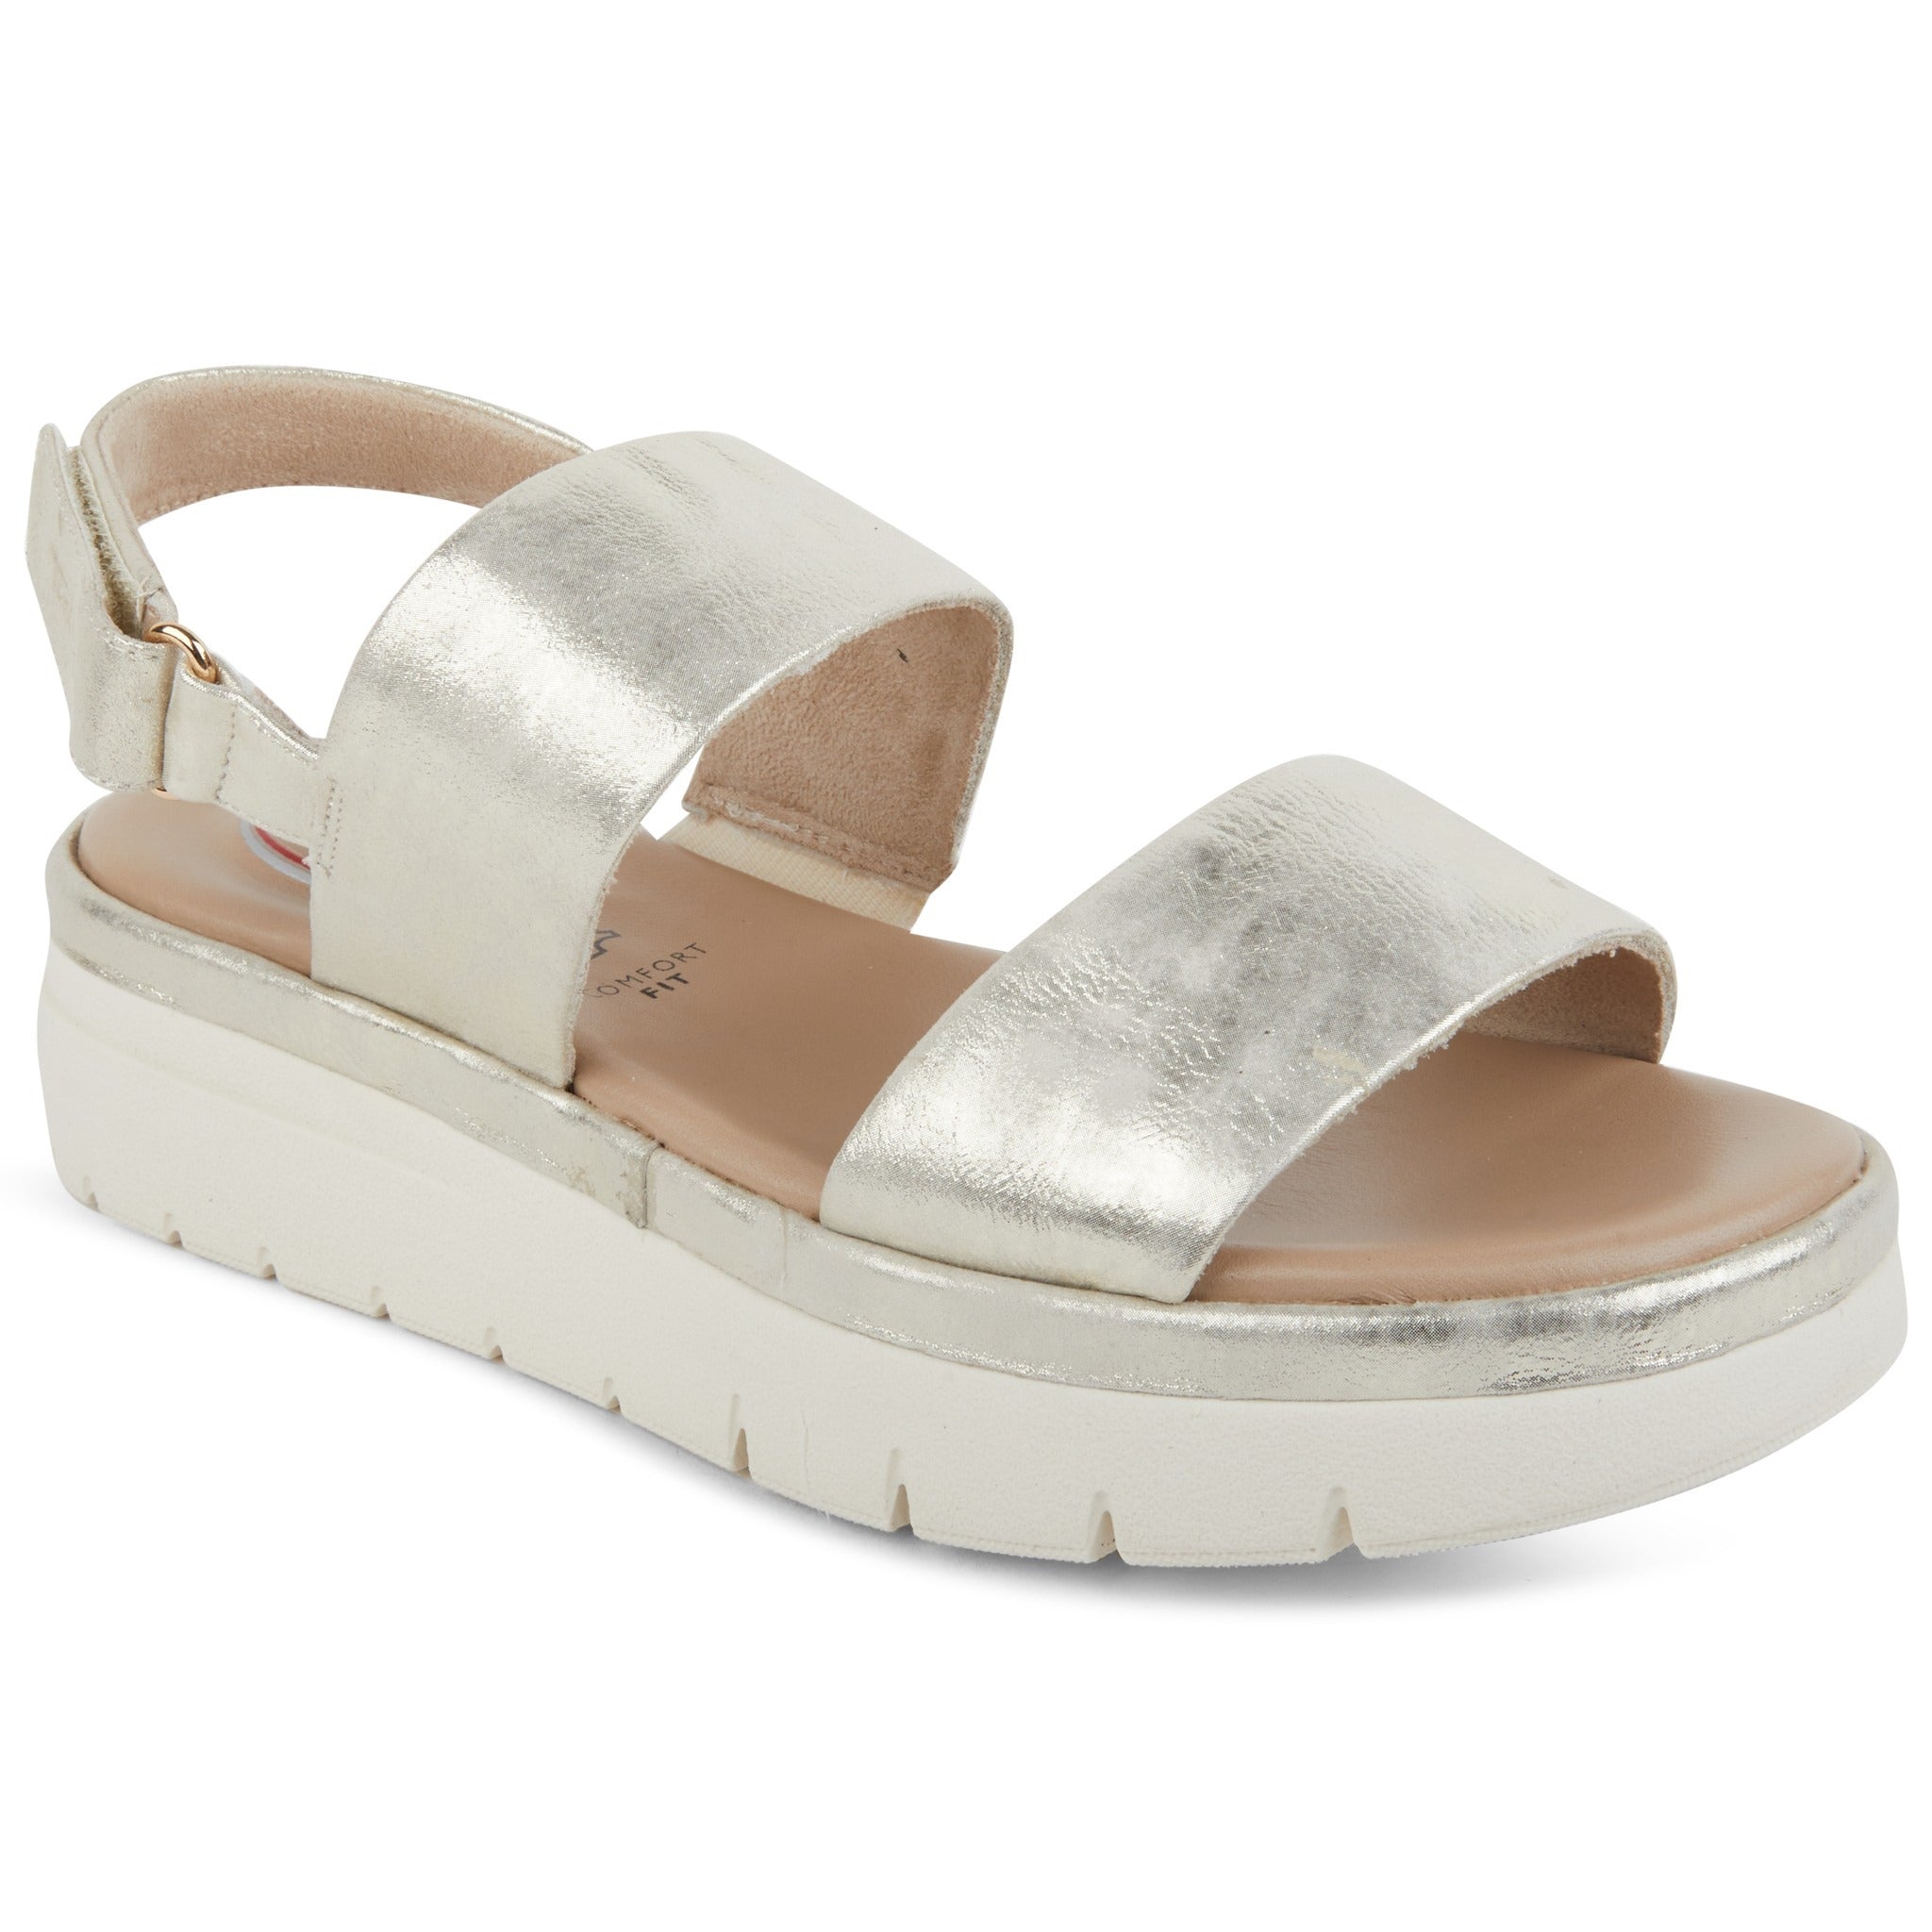 Comfy Sandals for Women